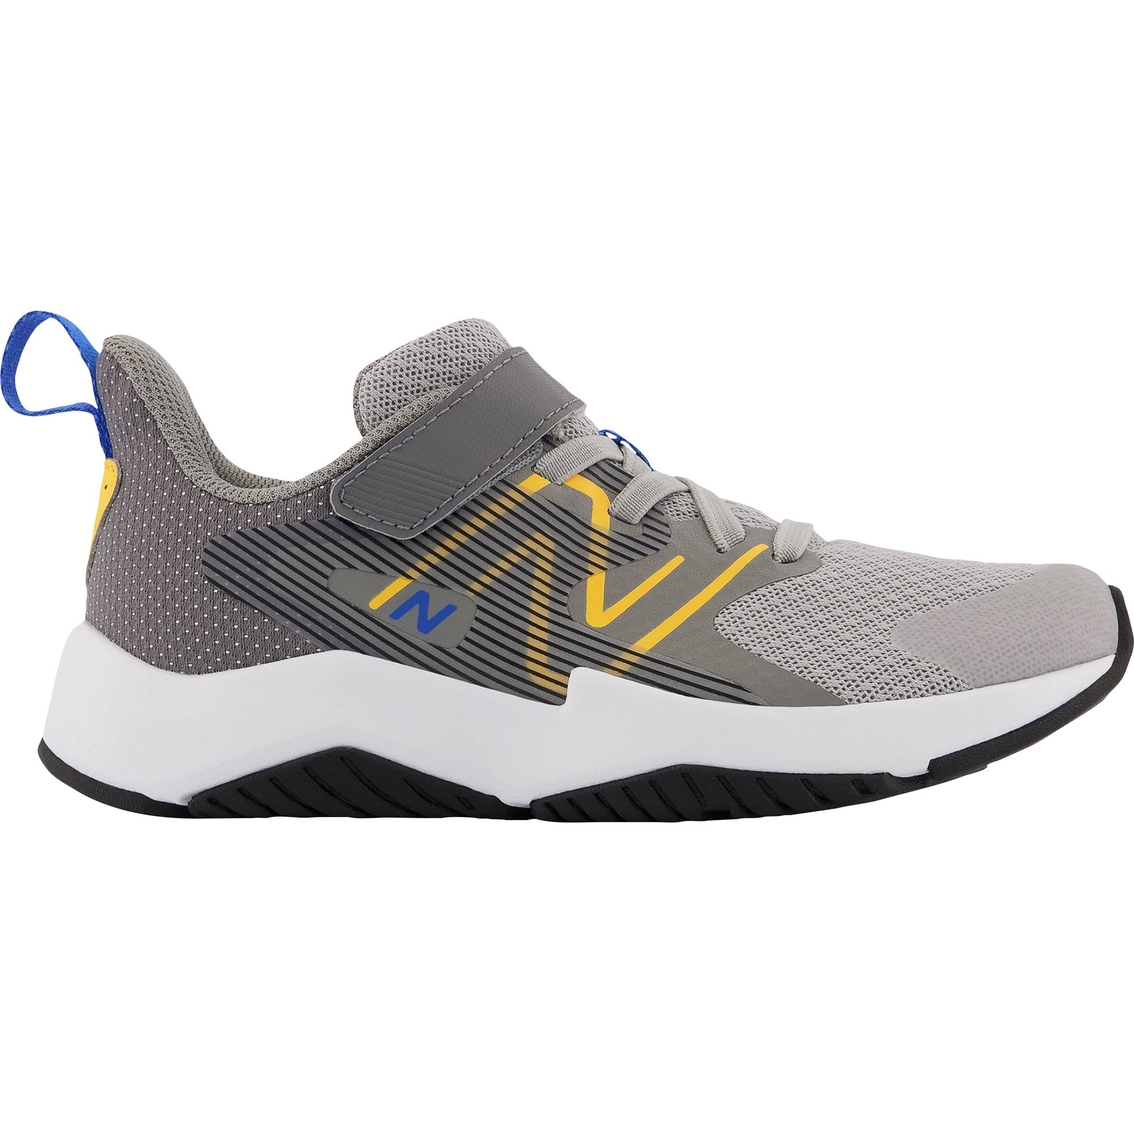 New Balance Boys Ytravgy2030 Running Shoes | Children's Athletic Shoes ...